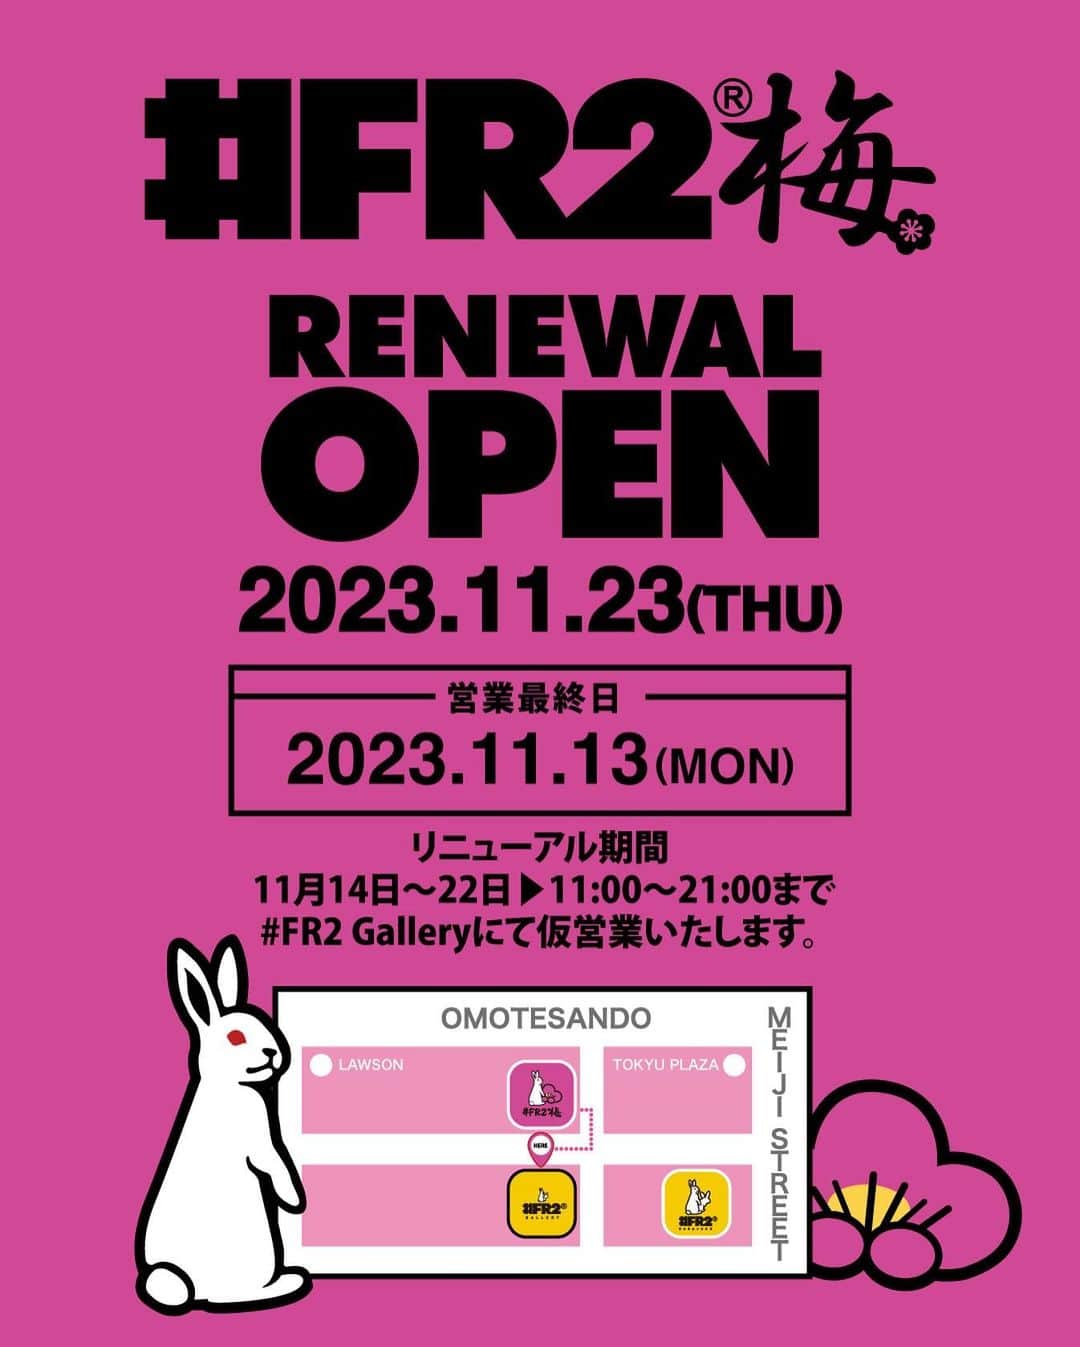 #FR2梅(UME)さんのインスタグラム写真 - (#FR2梅(UME)Instagram)「#FR2 UME 2023.11.23 (Thu) "RENEWAL OPEN" Thank you for your patronage of #FR2 UME. Our store will be having a renewal opening on Thursday, 23rd November, 2023. We apologize for the inconvenience during the period of our renovation works. Please look forward to the new #FR2 UME. During the period of renovation works prior to the renewal, we will temporarily be operating at our #FR2 Gallery location. #FR2 Gallery November 14th - November 22nd 1F, 4-28-16 Jingumae, Shibuya-ku, Tokyo Business hours: 11:00 - 21:00 #FR2 UME 2023.11.23 (thu) "RENEWAL OPEN" いつも #FR2梅 をご愛顧いただき、誠にありがとうございます。 店は、2023年11月23日（木）にリニューアルオープンいたします。 オープンまでの期間中、お客様にはご迷惑をお掛けいたしますが 新しく生まれ変わる、#FR2梅 にご期待ください。 リニューアル期間 #FR2Gallery にて仮営業いたします。 #FR2 Gallery 11月14日 - 11月22日 東京都渋谷区神宮前4-28-16 1F 営業時間：11:00 - 21:00」11月11日 11時00分 - fr2ume